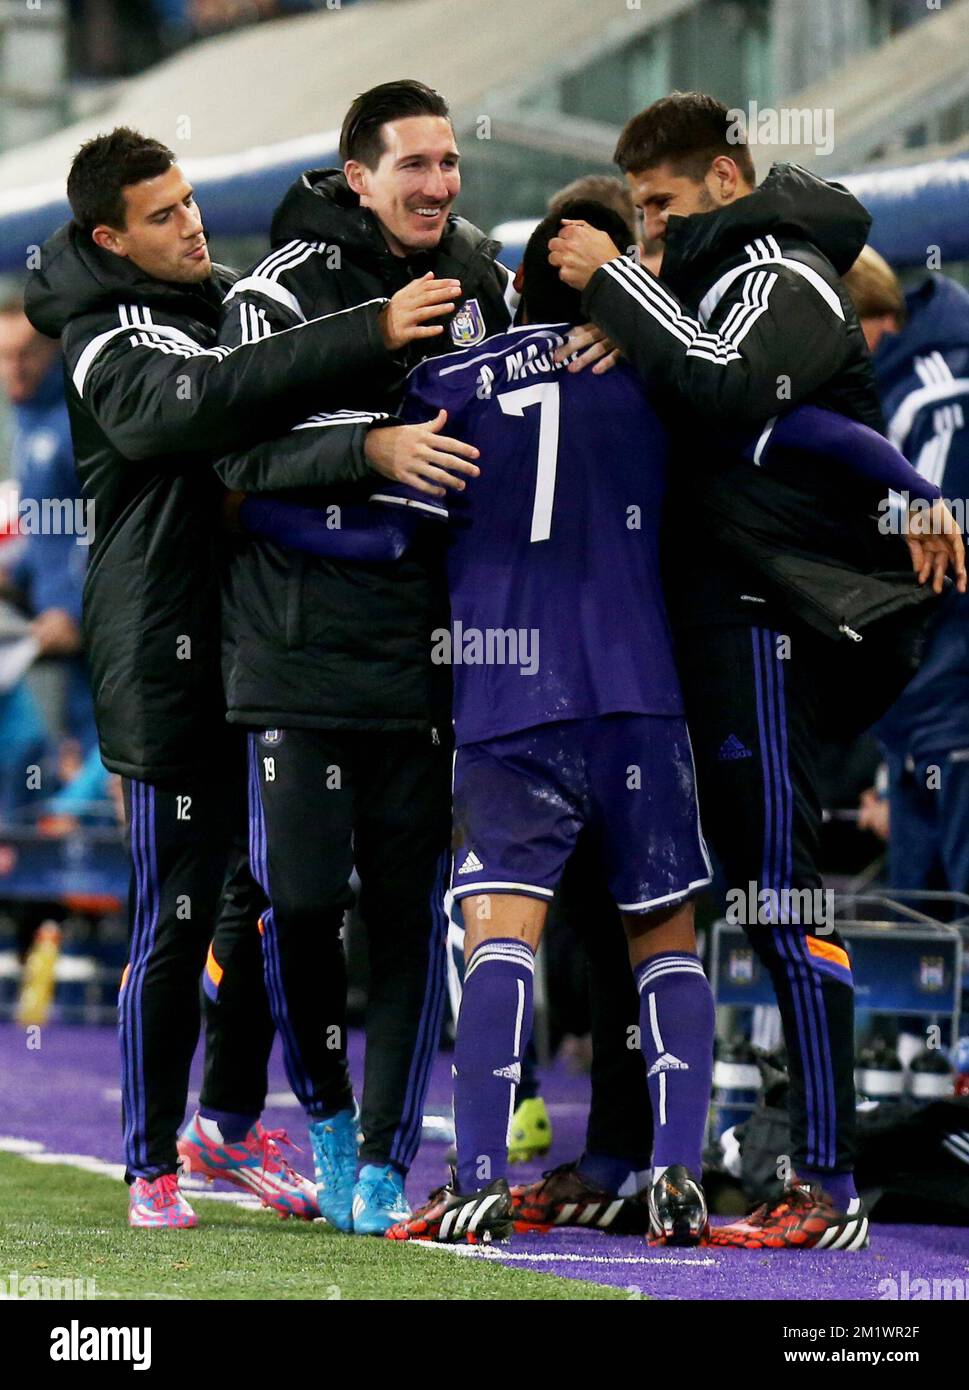 Anderlecht's Matias Suarez, Anderlecht's Sacha Kljestan, Anderlecht's Andy Najar and Anderlecht's Alexandar Mitrovic celebrate after scoring during a third group stage game between RSCA Anderlecht and English team Arsenal, in the group D of the UEFA Champions League competition, Wednesday 22 October 2014. Stock Photo